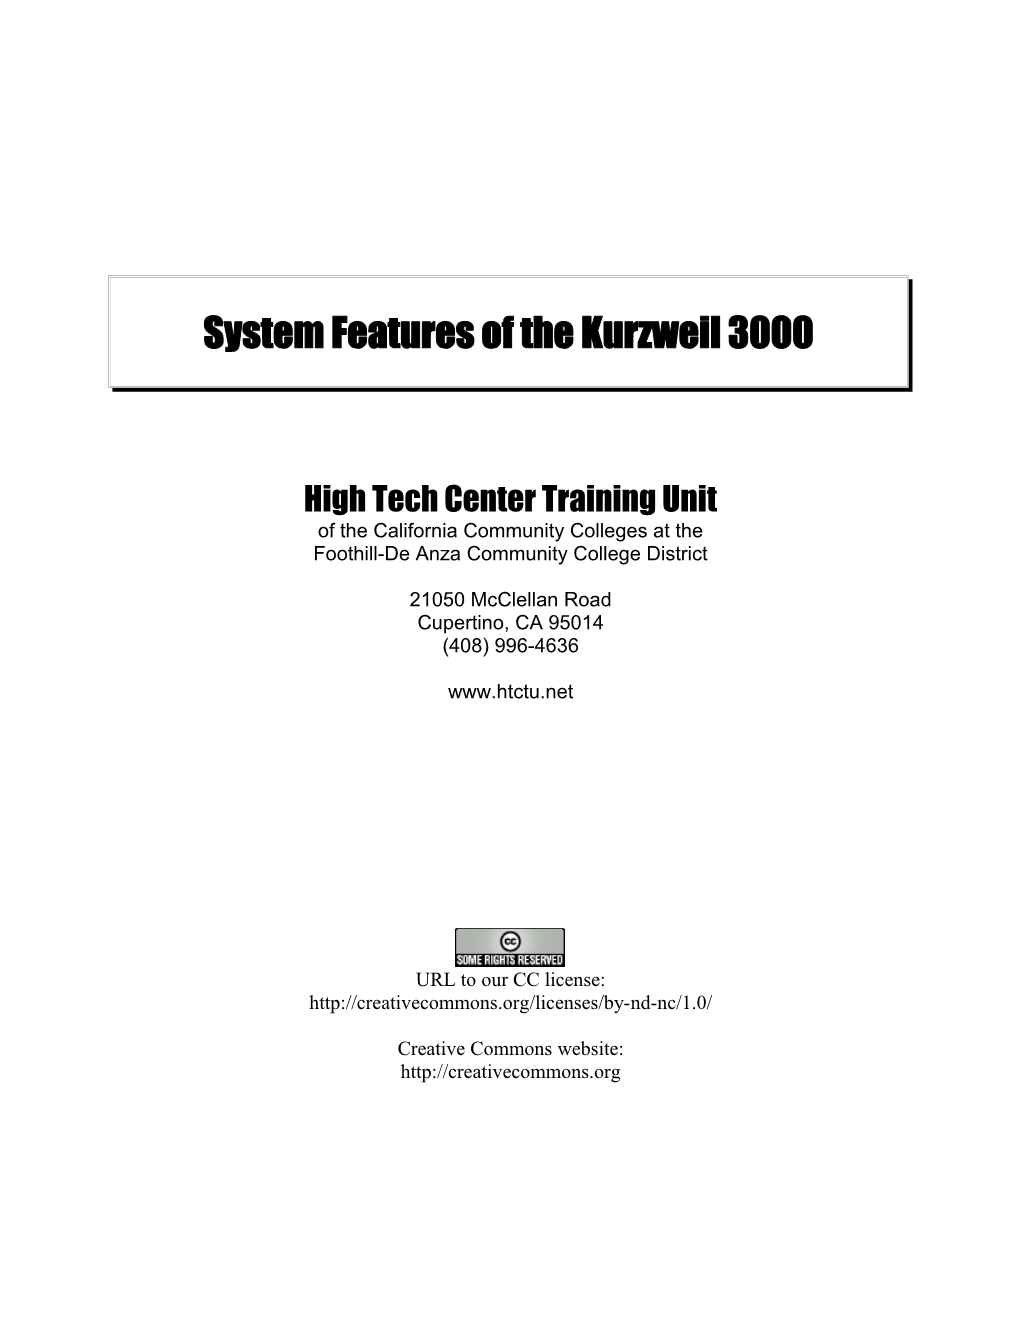 System Features of the Kurzweil 3000